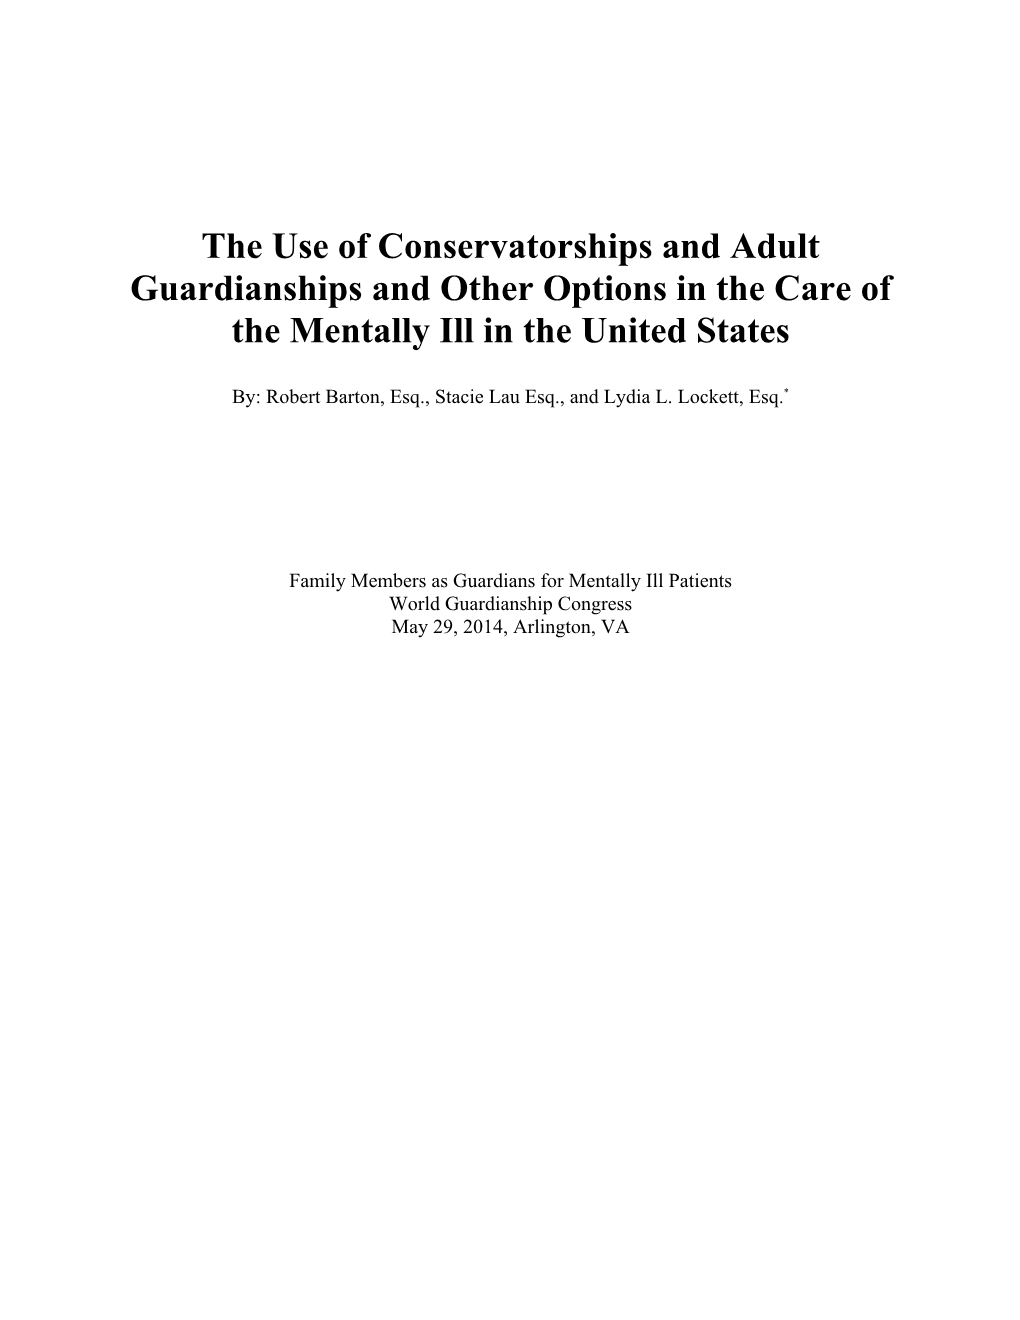 The Use of Conservatorships and Adult Guardianships and Other Options in the Care of the Mentally Ill in the United States